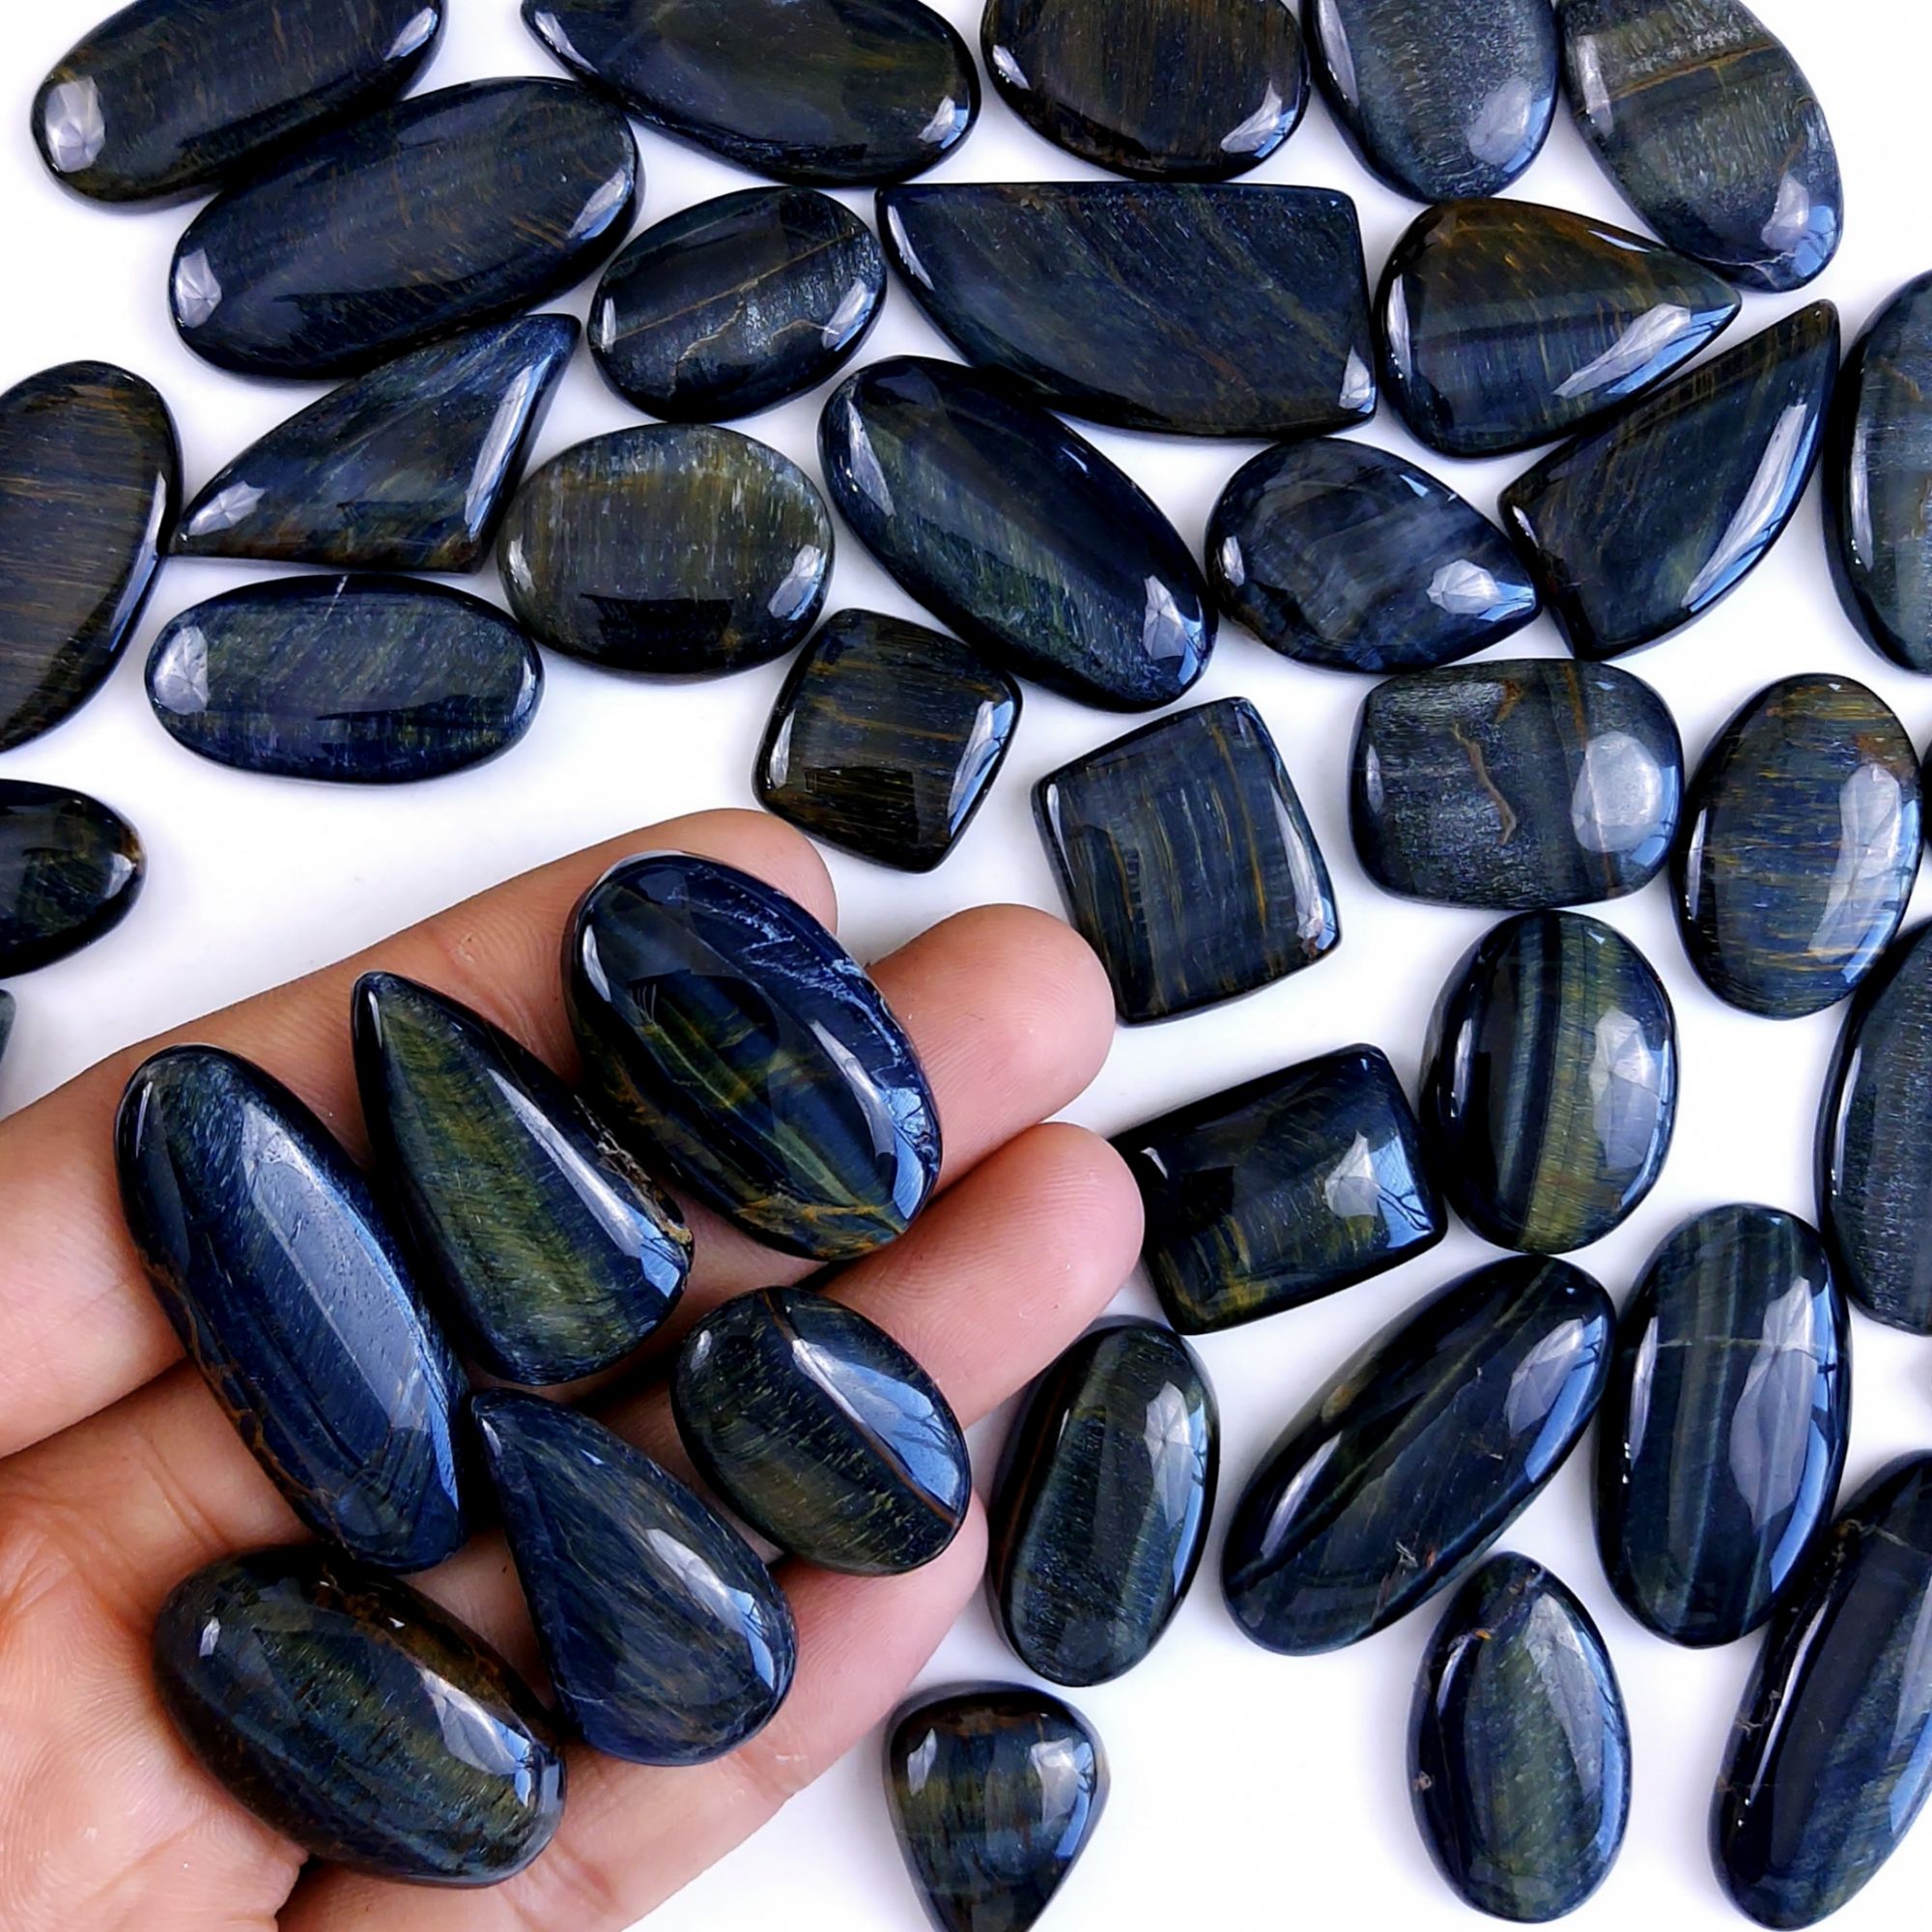 45Pcs 1218Cts Natural Tiger Eye Loose Cabochon Gemstone Lot Mix Shape and and Size for Jewelry Making 38x17 22x18mm#1317